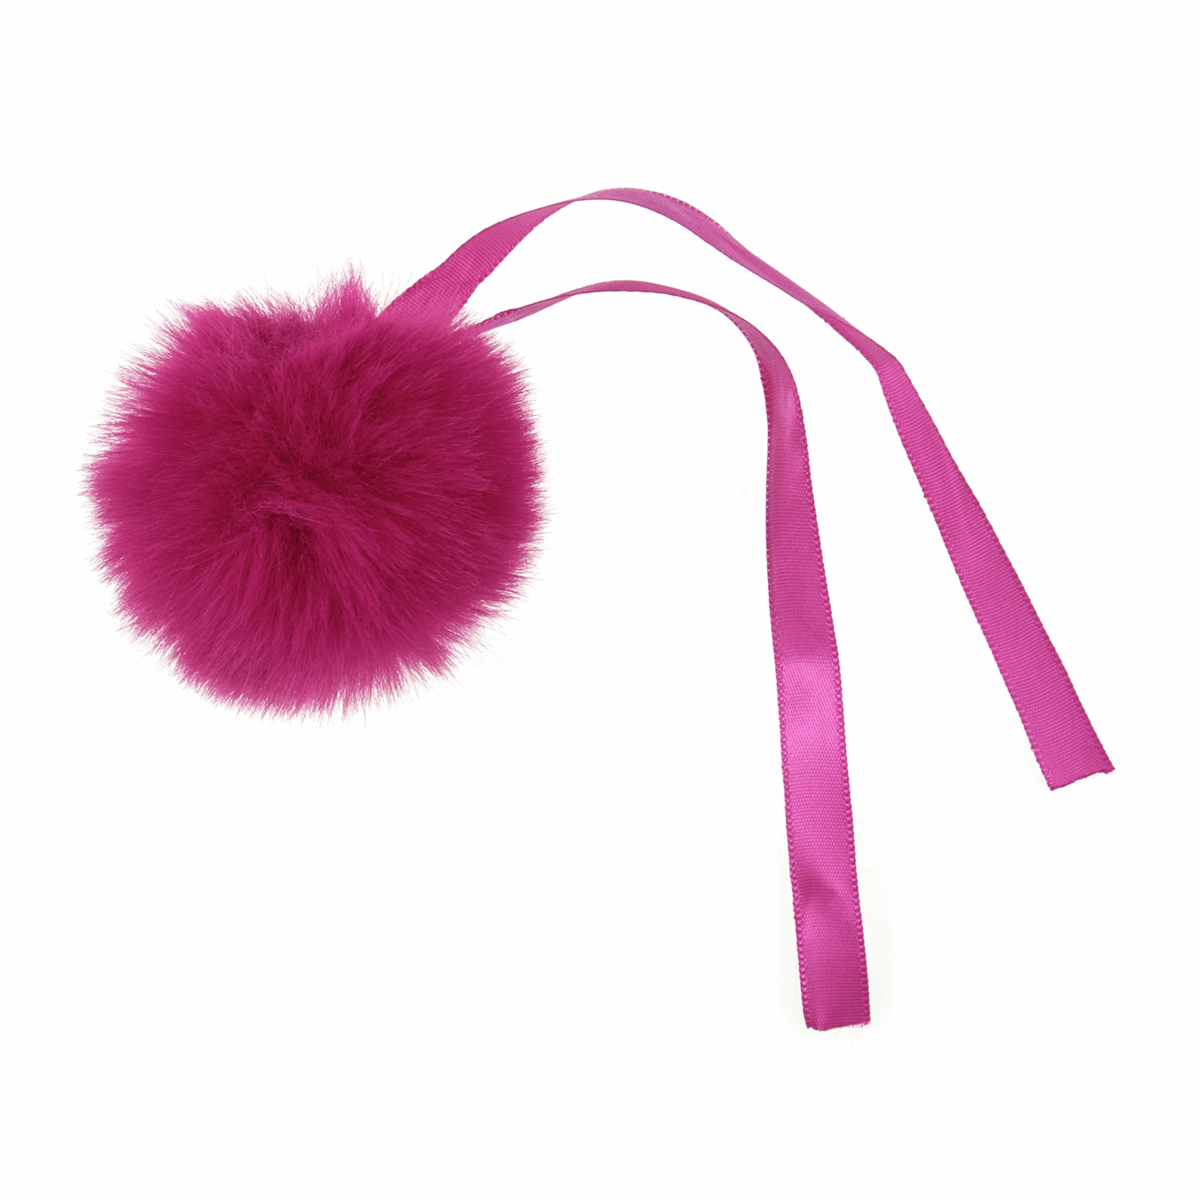 Large 11cm Faux Fur Pompoms From Trimits Available in Selection of Colours,  Tie-on Pompom, Pompoms for Hat Making -  Finland